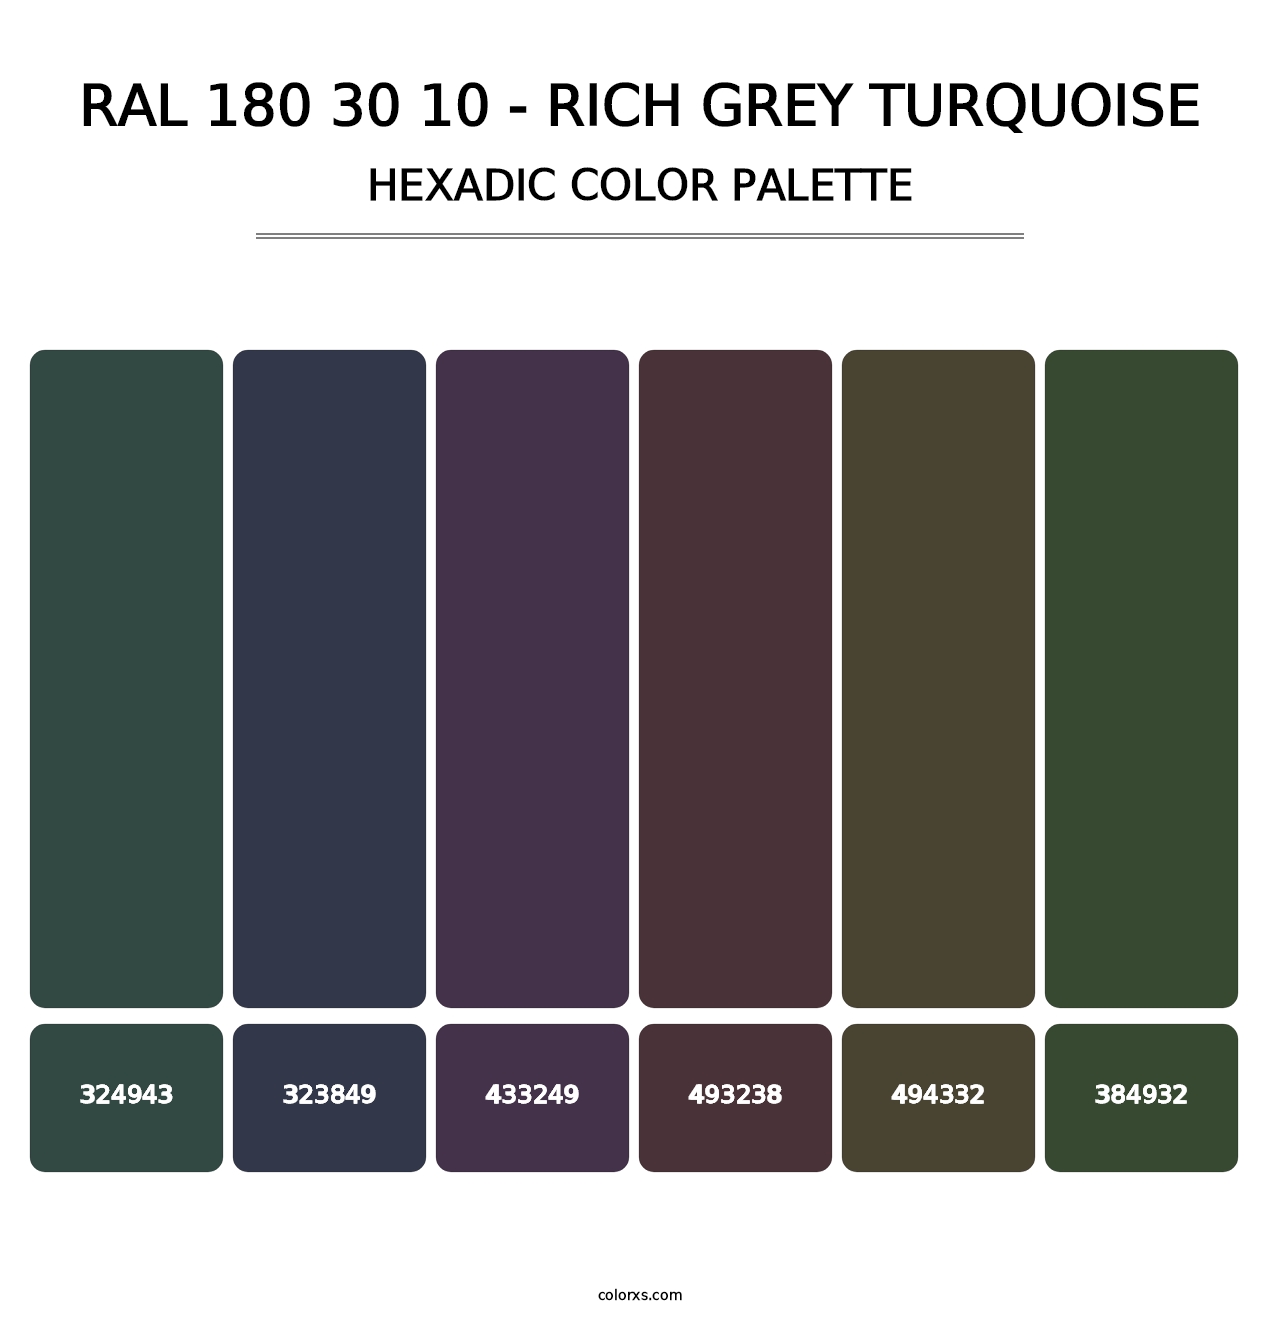 RAL 180 30 10 - Rich Grey Turquoise - Hexadic Color Palette